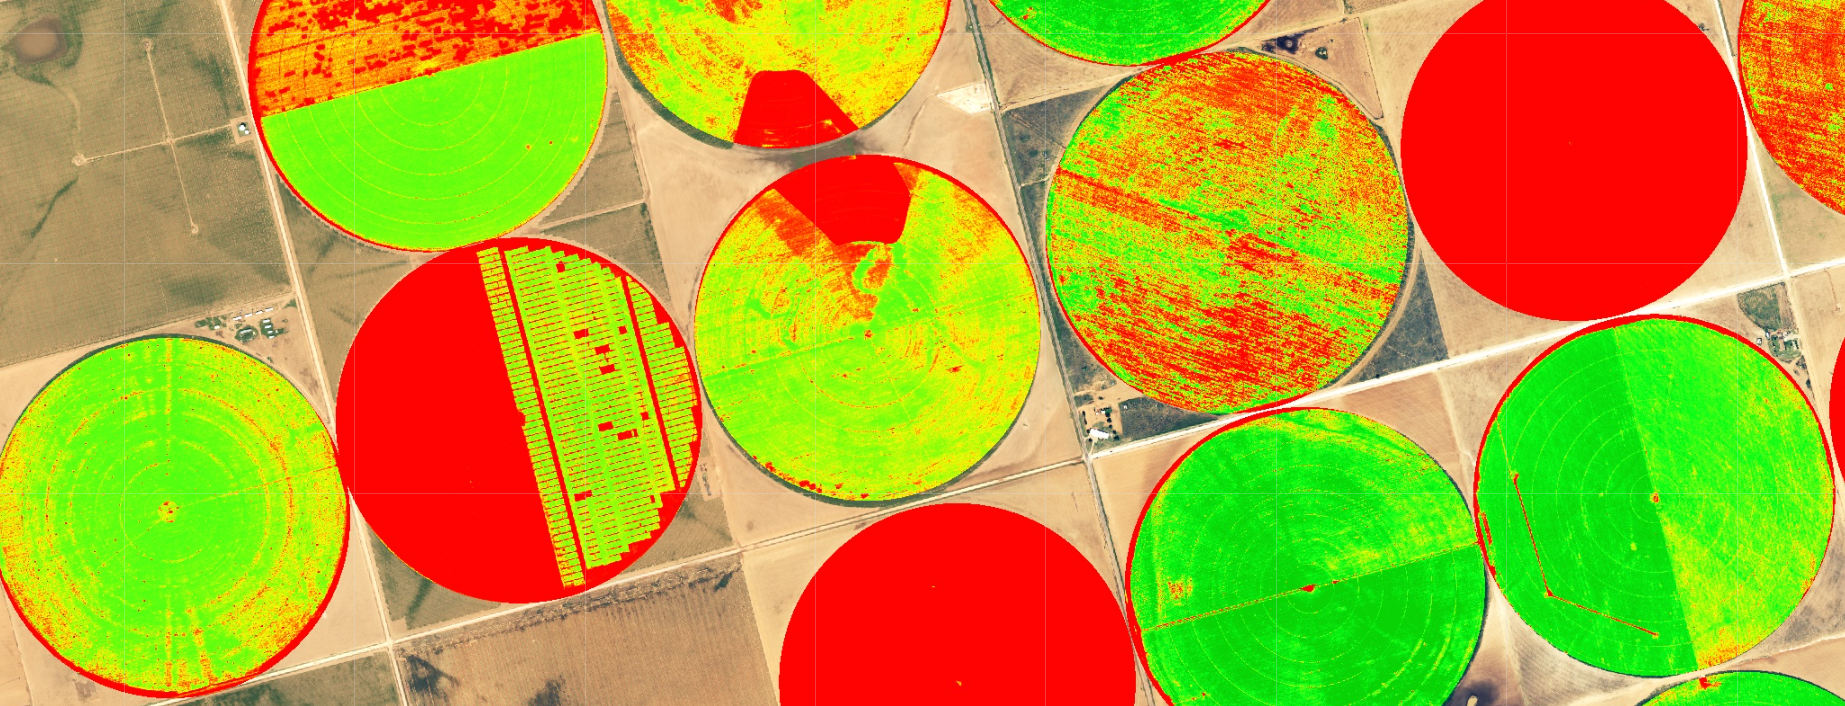 This image shows a natural color composite satellite image of a field containing irrigation center pivots in which the boundary within the pivot is being presented as a vegetation index NDVI in false color composite from red for areas with little vegetation to green for areas with lots of vegetation.